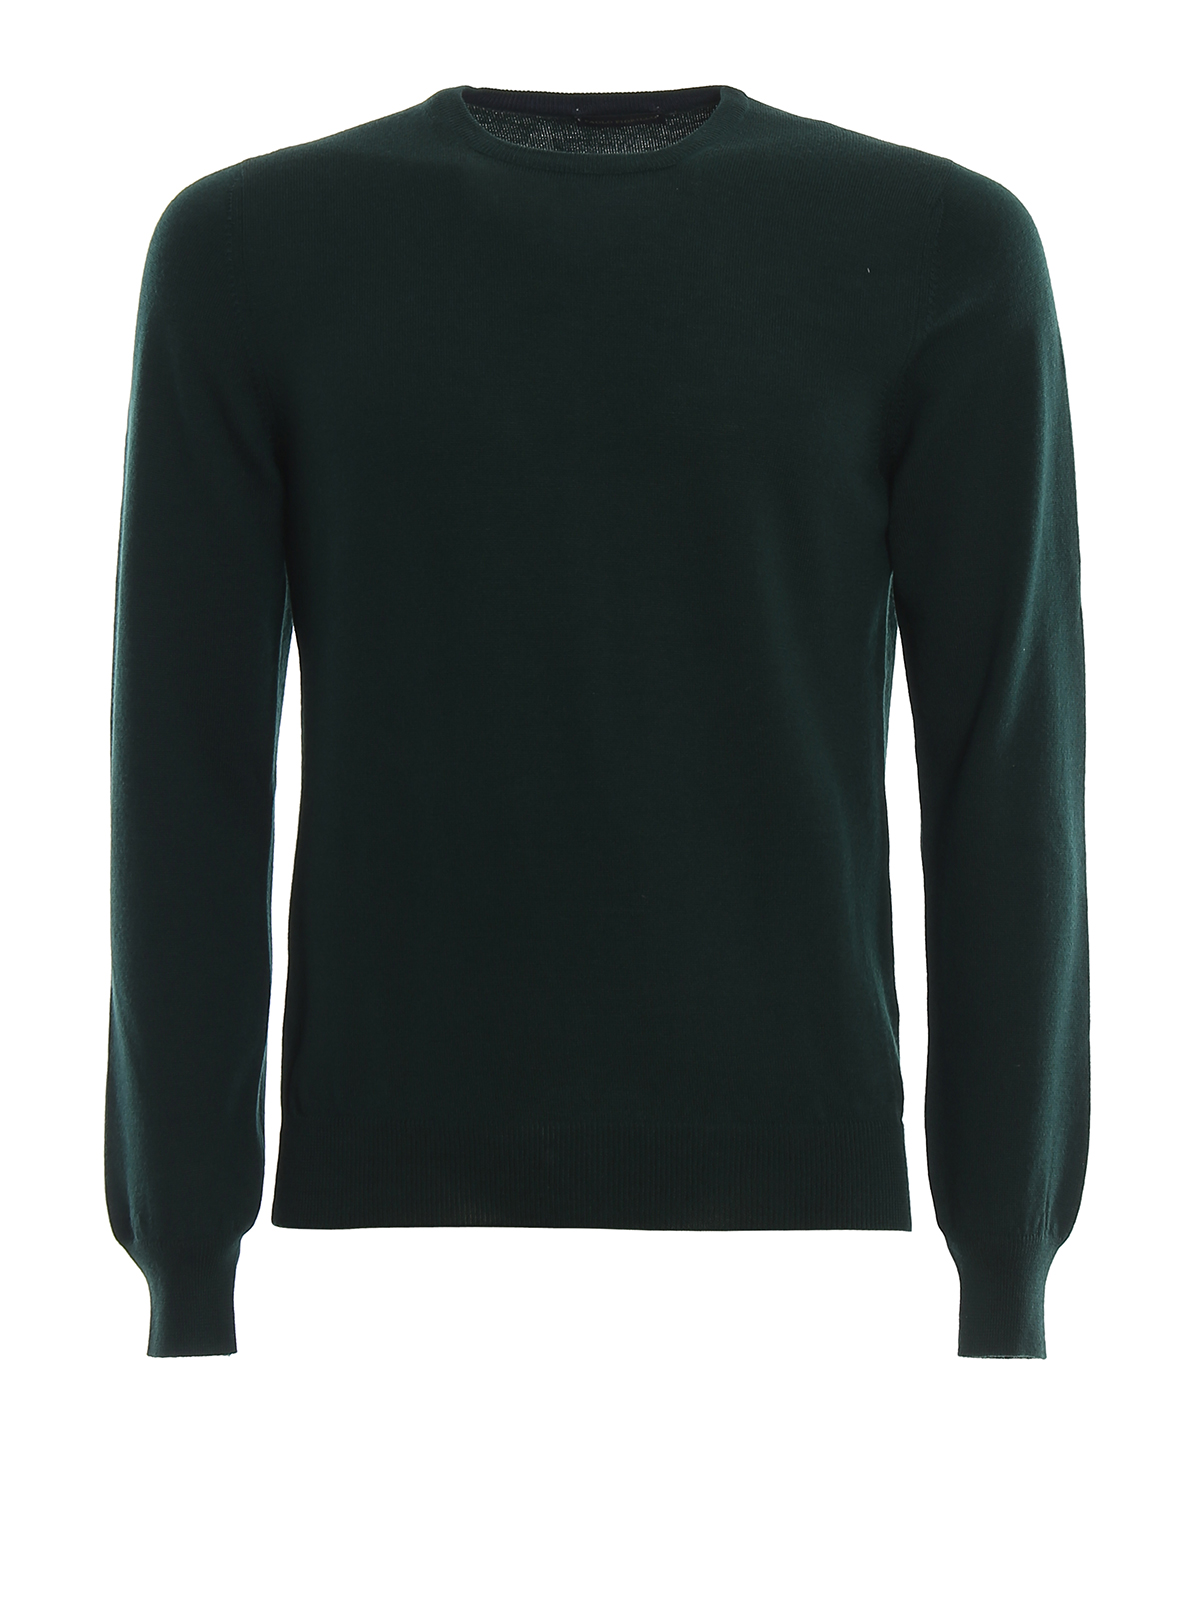 Paolo Fiorillo Green Combed Wool Jumper